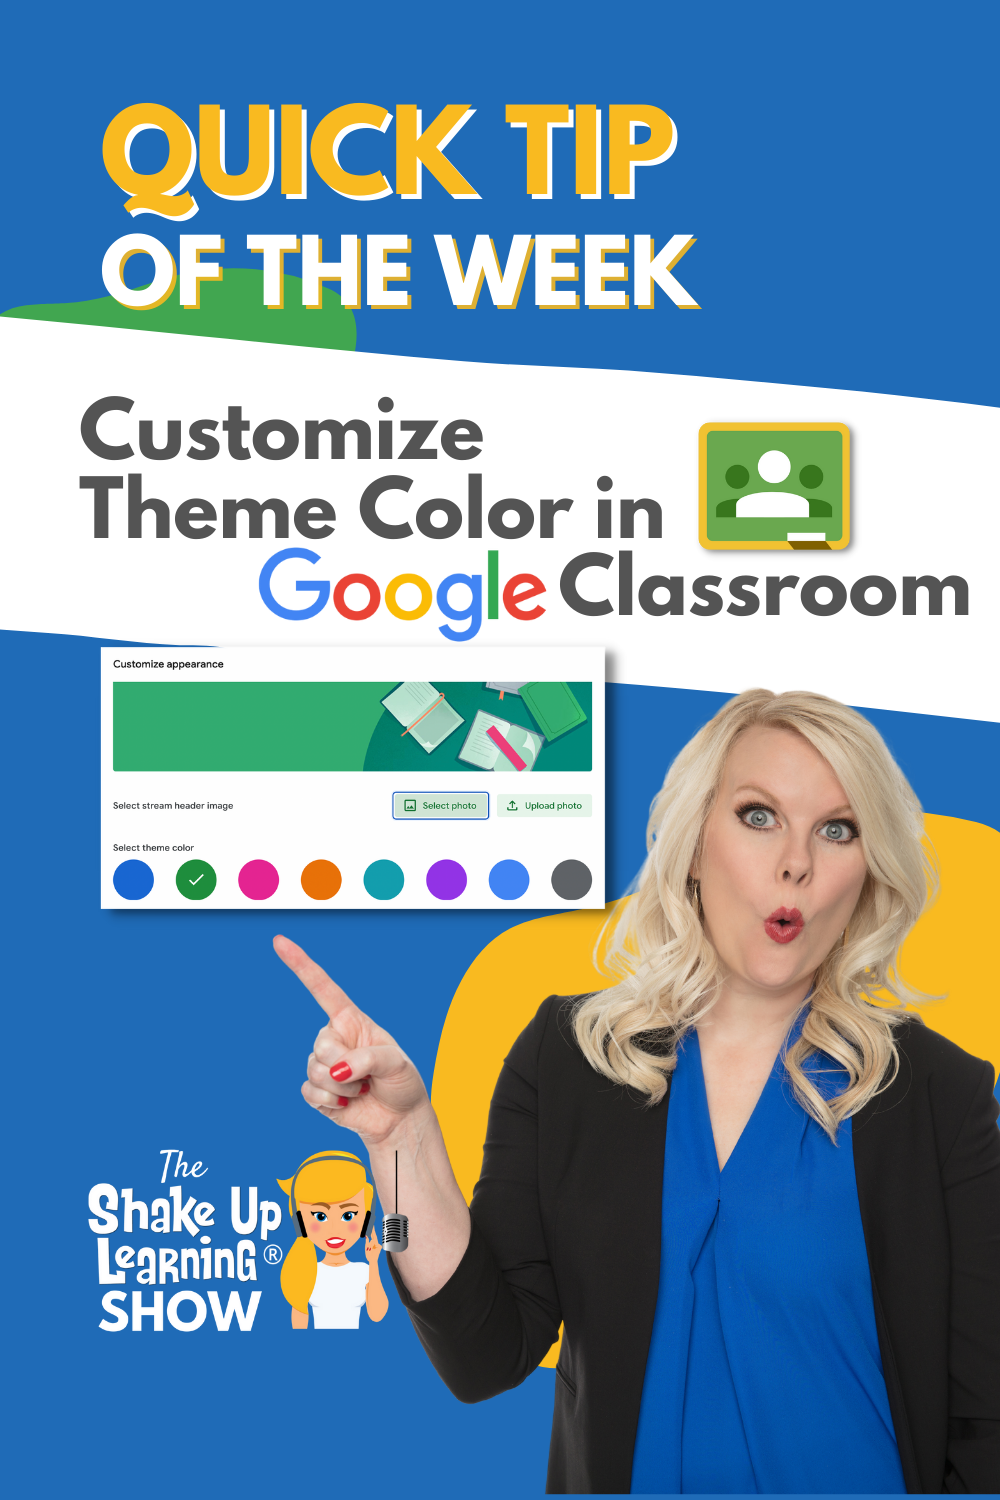 How to Customize the Theme Color in Google Classroom